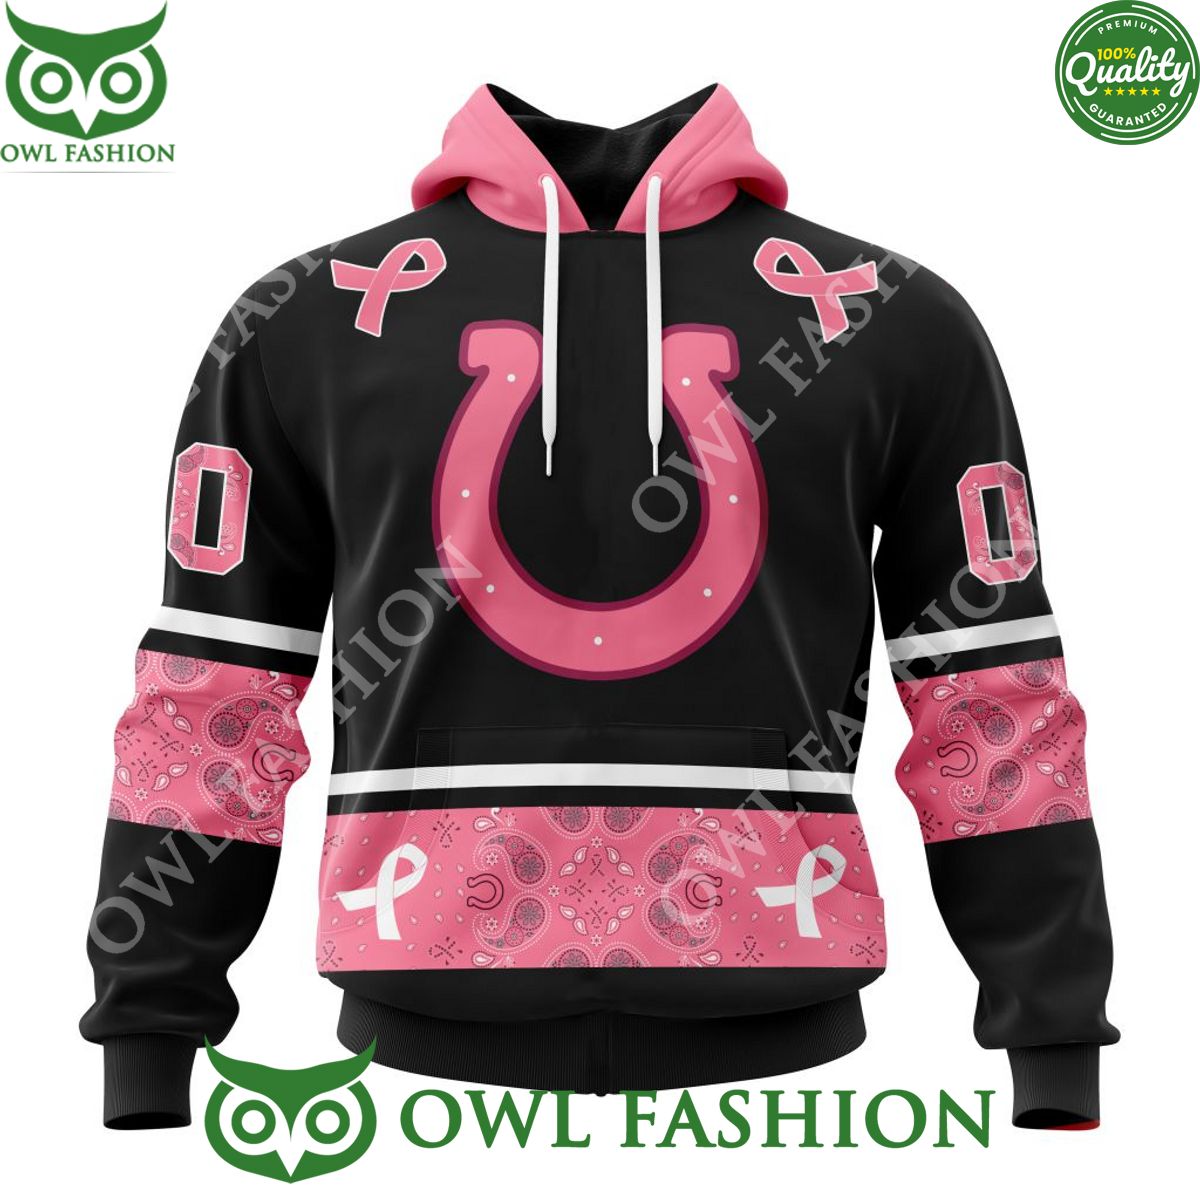 indianapolis colts pink breast cancer nfl personalized 3d hoodie shirt 1 Uo3RW.jpg